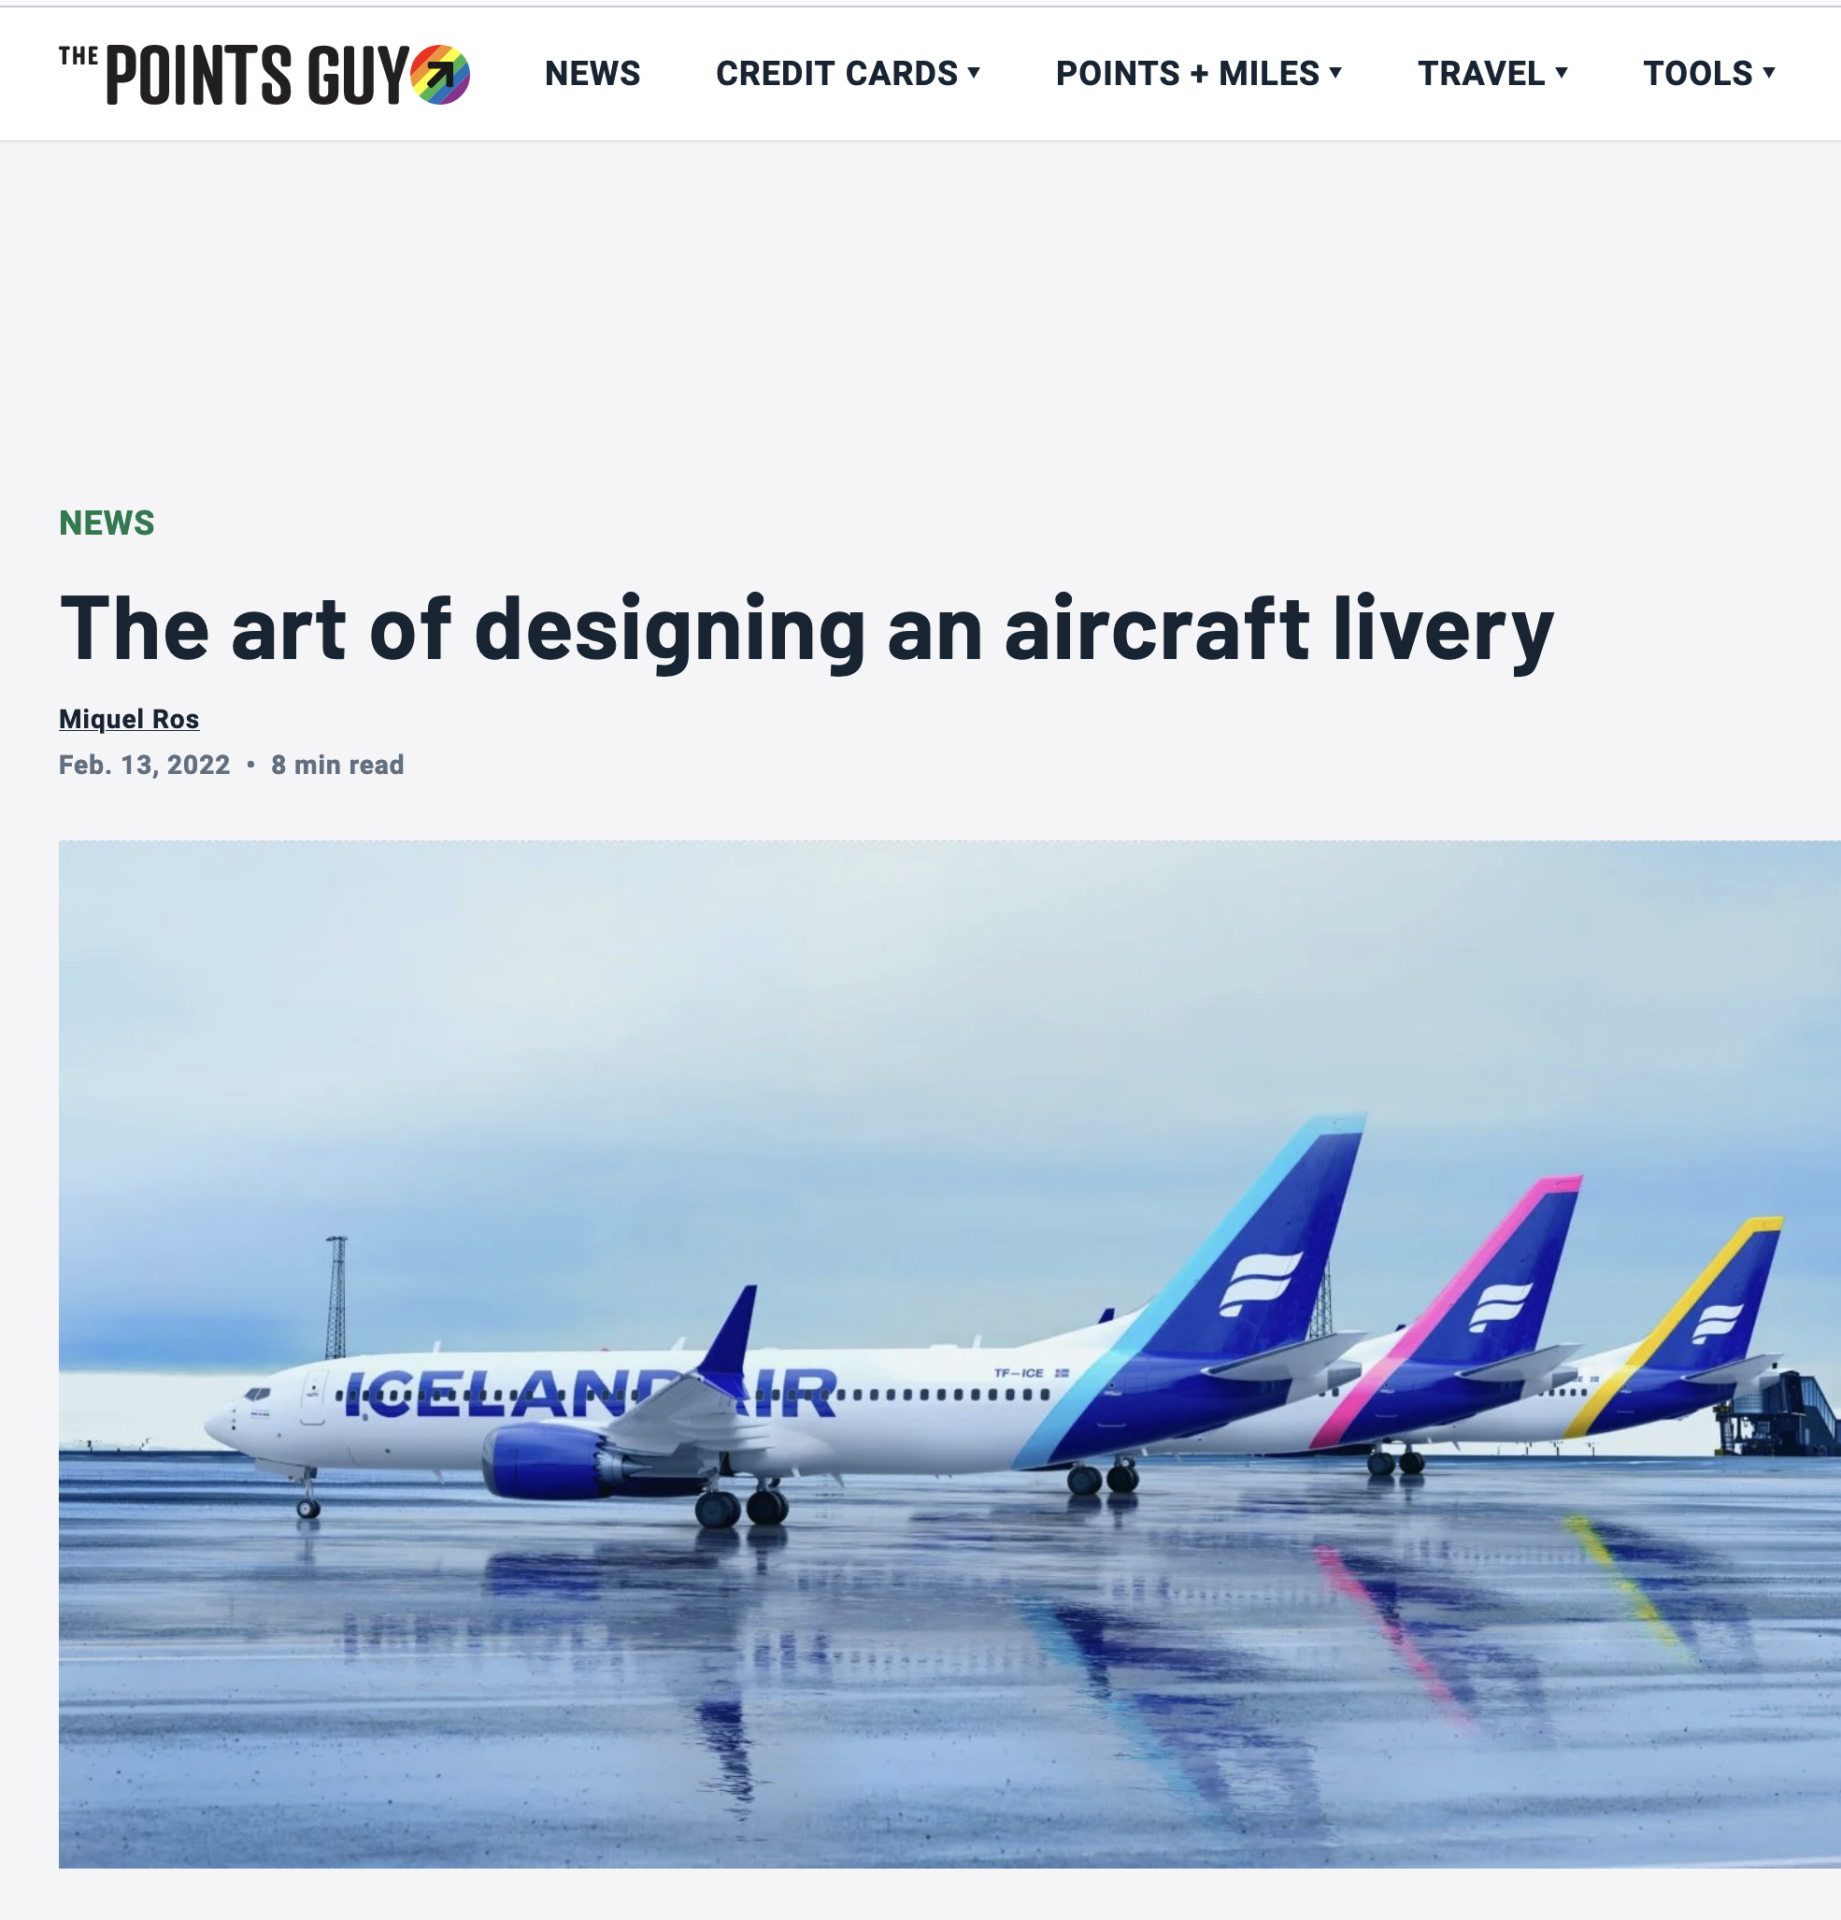 “The art of designing an aircraft livery”